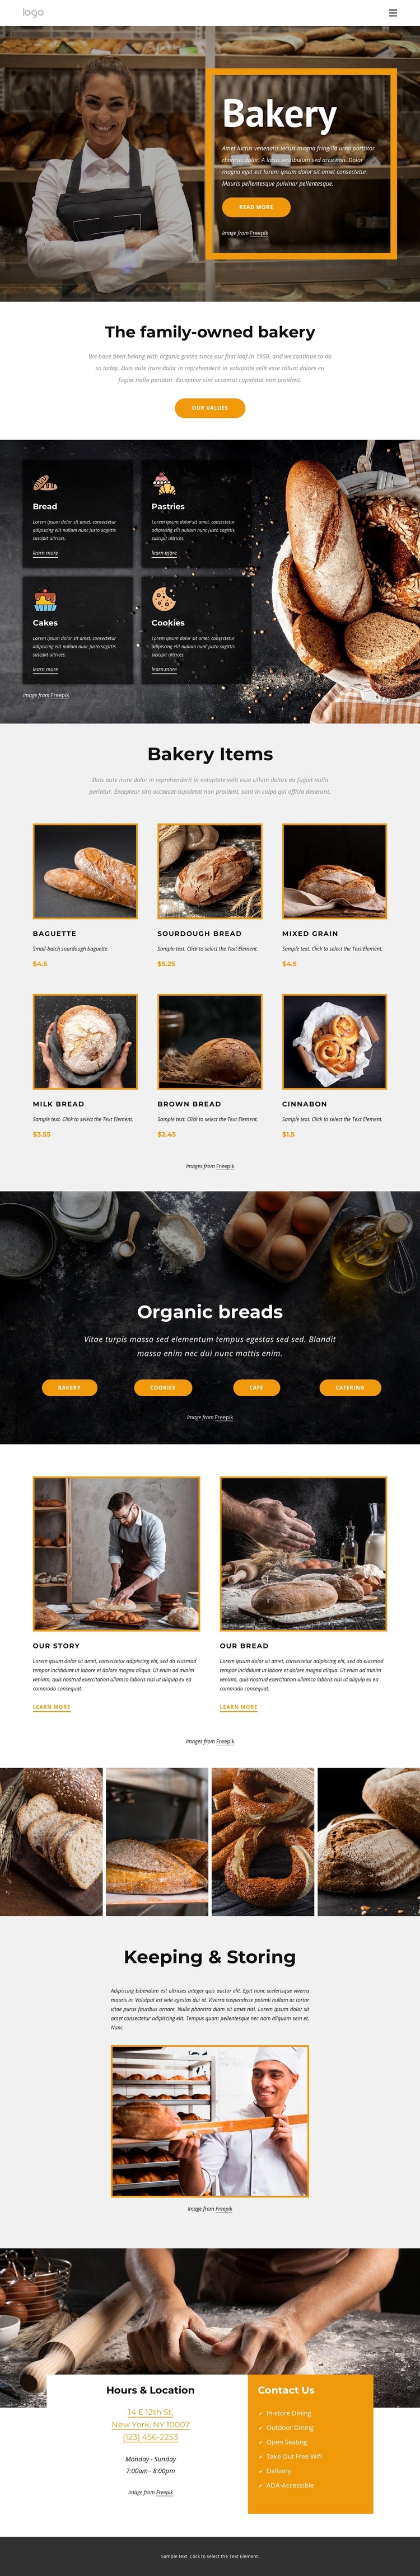 The family-owned bakery Website Builder Software